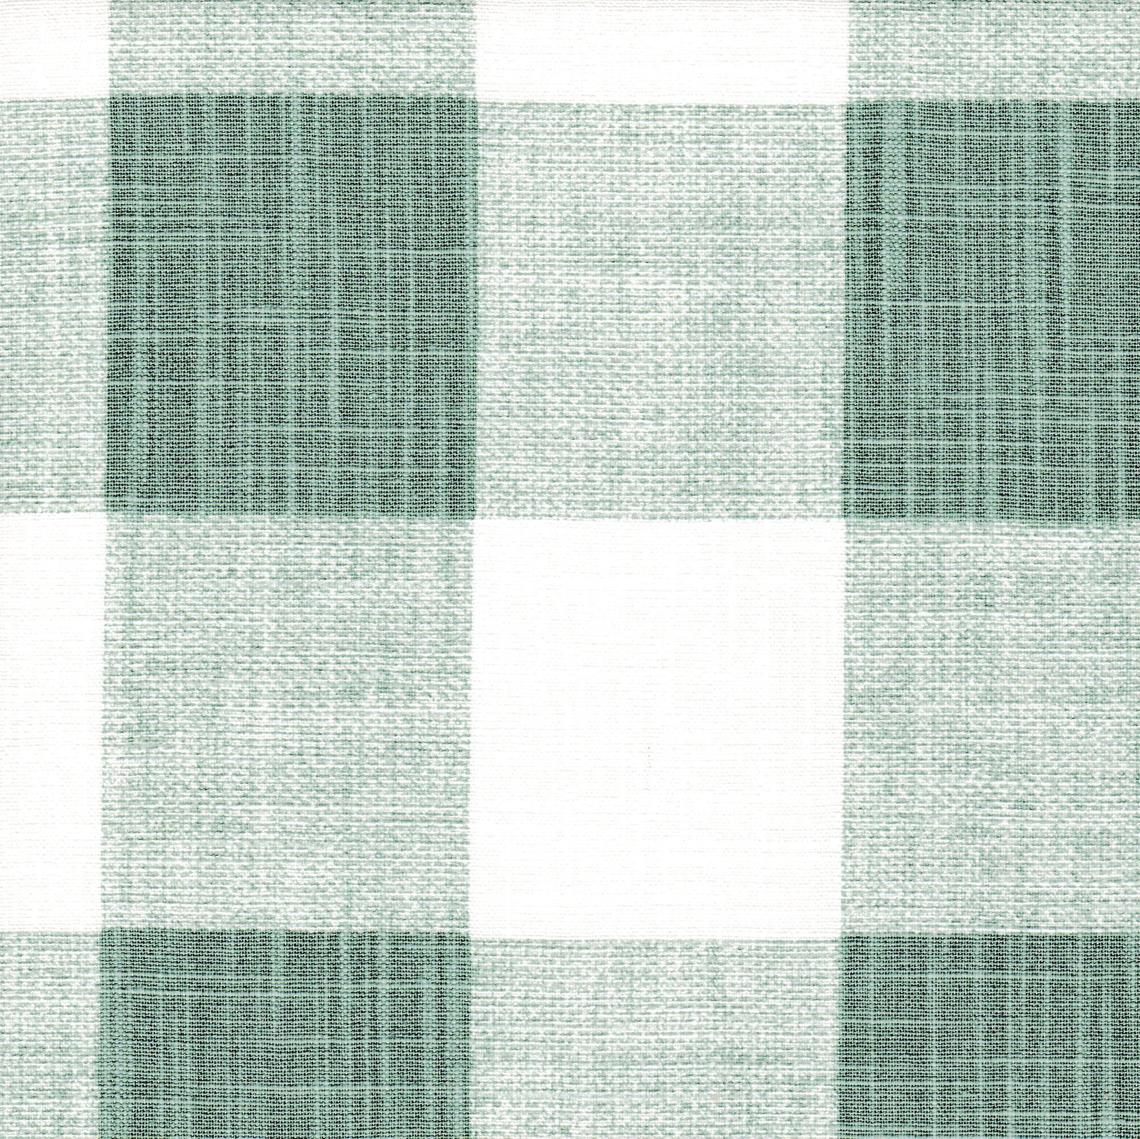 pinch pleated curtains in anderson waterbury spa green buffalo check plaid